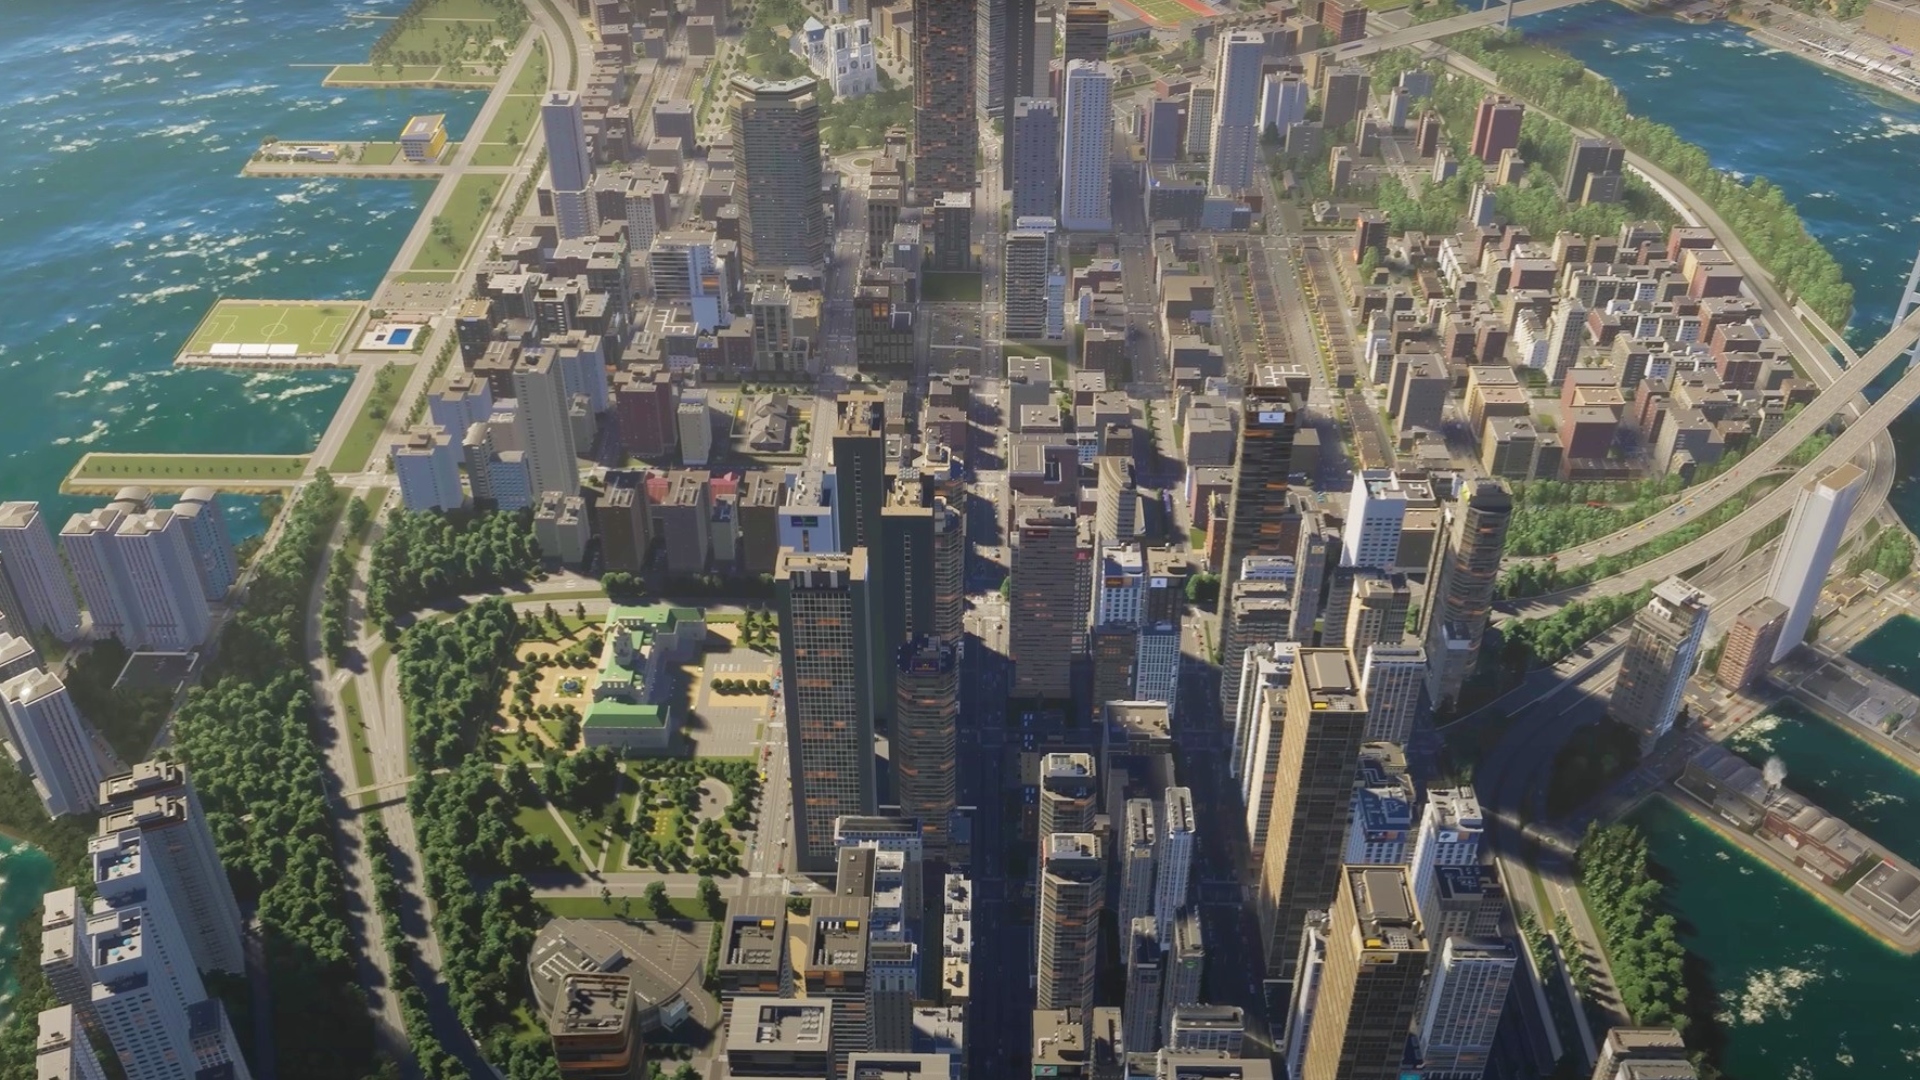 Cities: Skylines 2 multiplayer likely won't happen at launch or ever